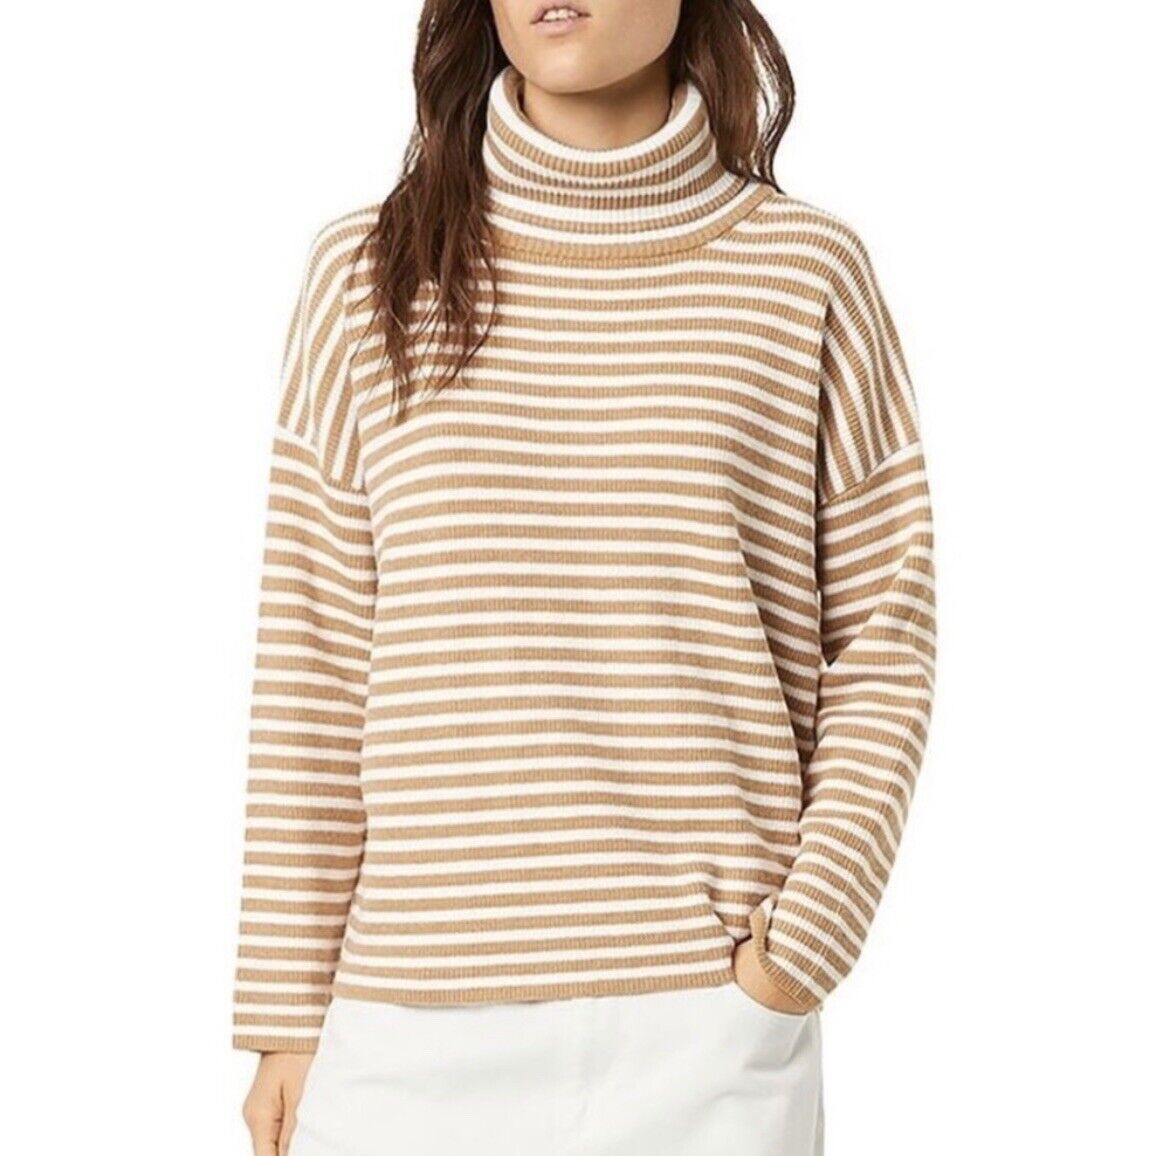 French Connection Tan Striped Turtleneck Sweater Size Small